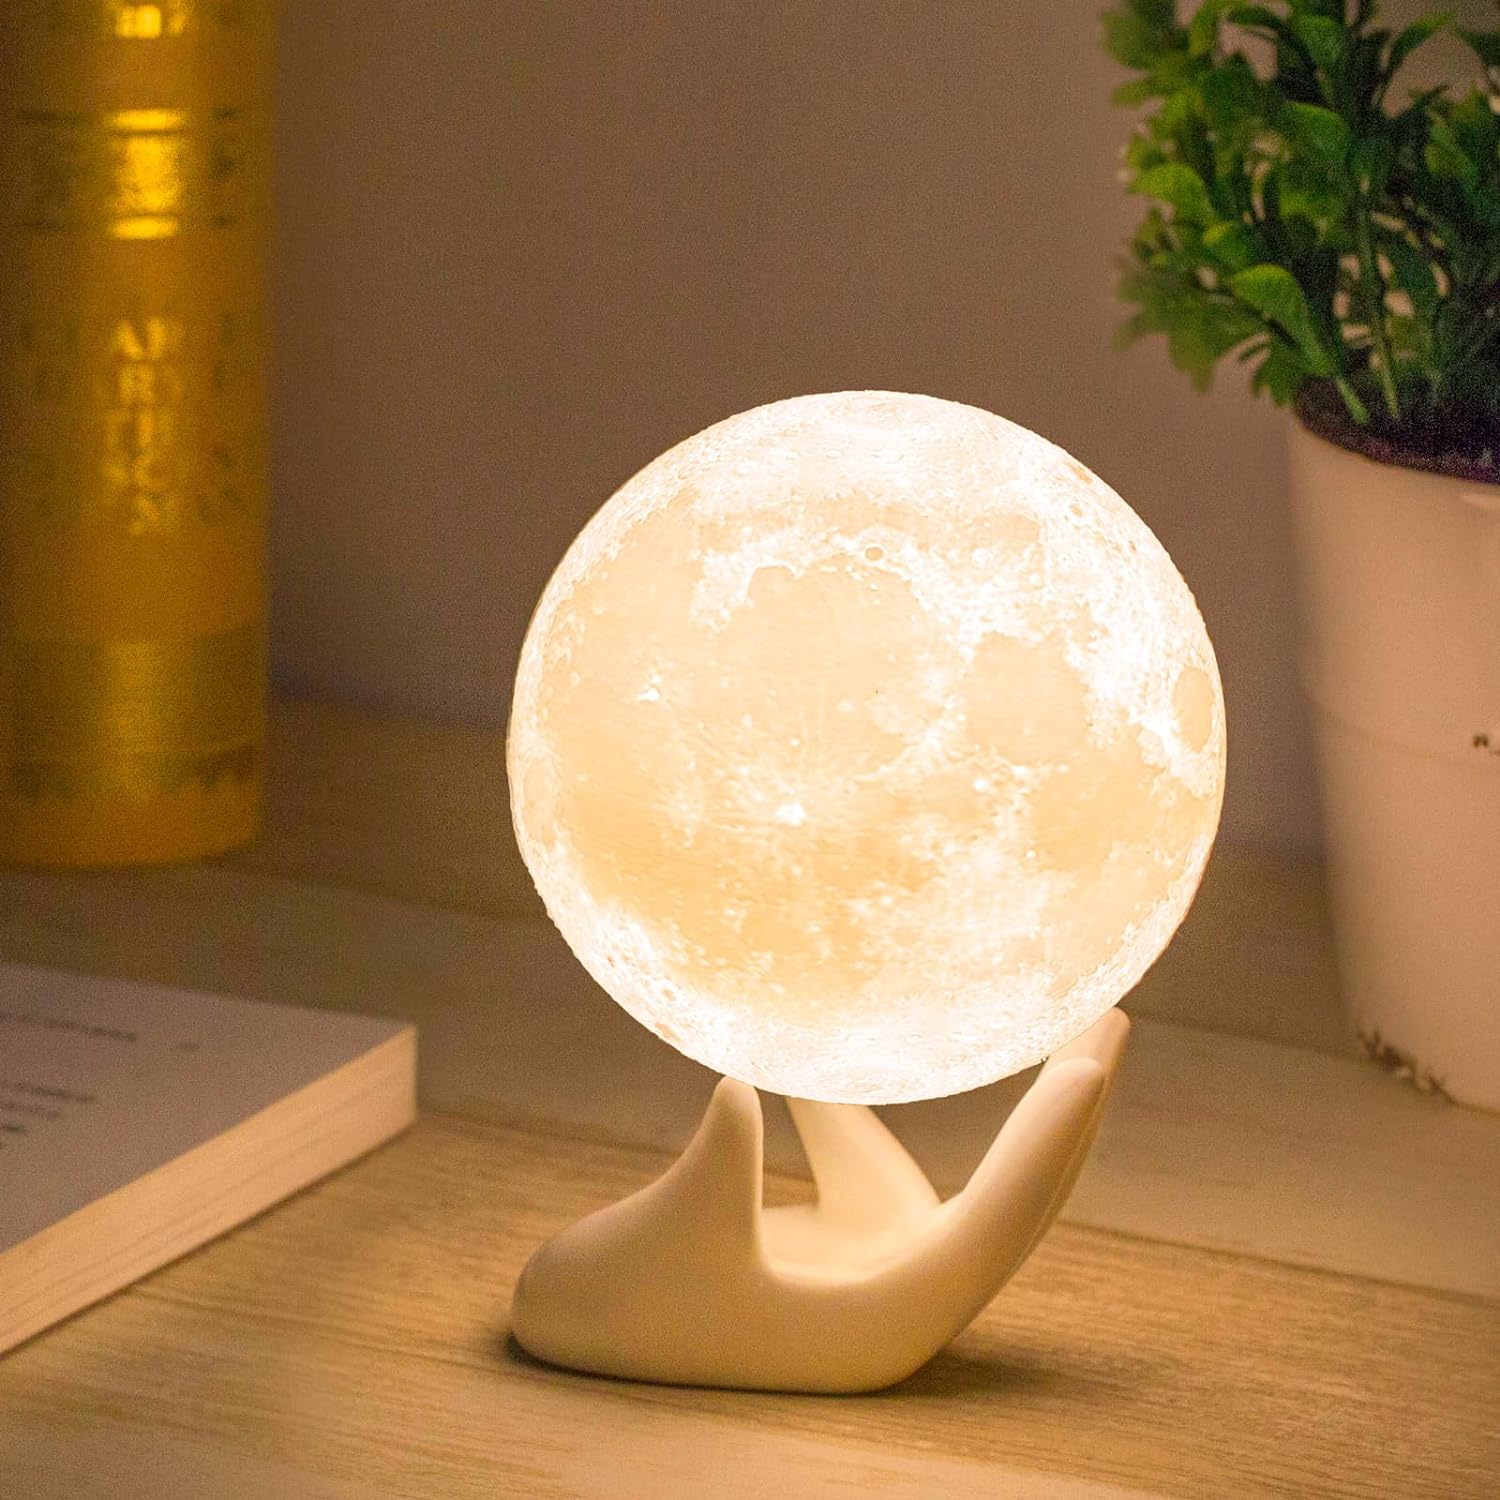 Mydethun Moon Lamp-Home Décor, Moon Light with Brightness Control, Gift for Women, LED Night Light, Bedroom, Living Room, Kids Birthday Gift, Ceramic Hand Base, 3.5, White  Yellow